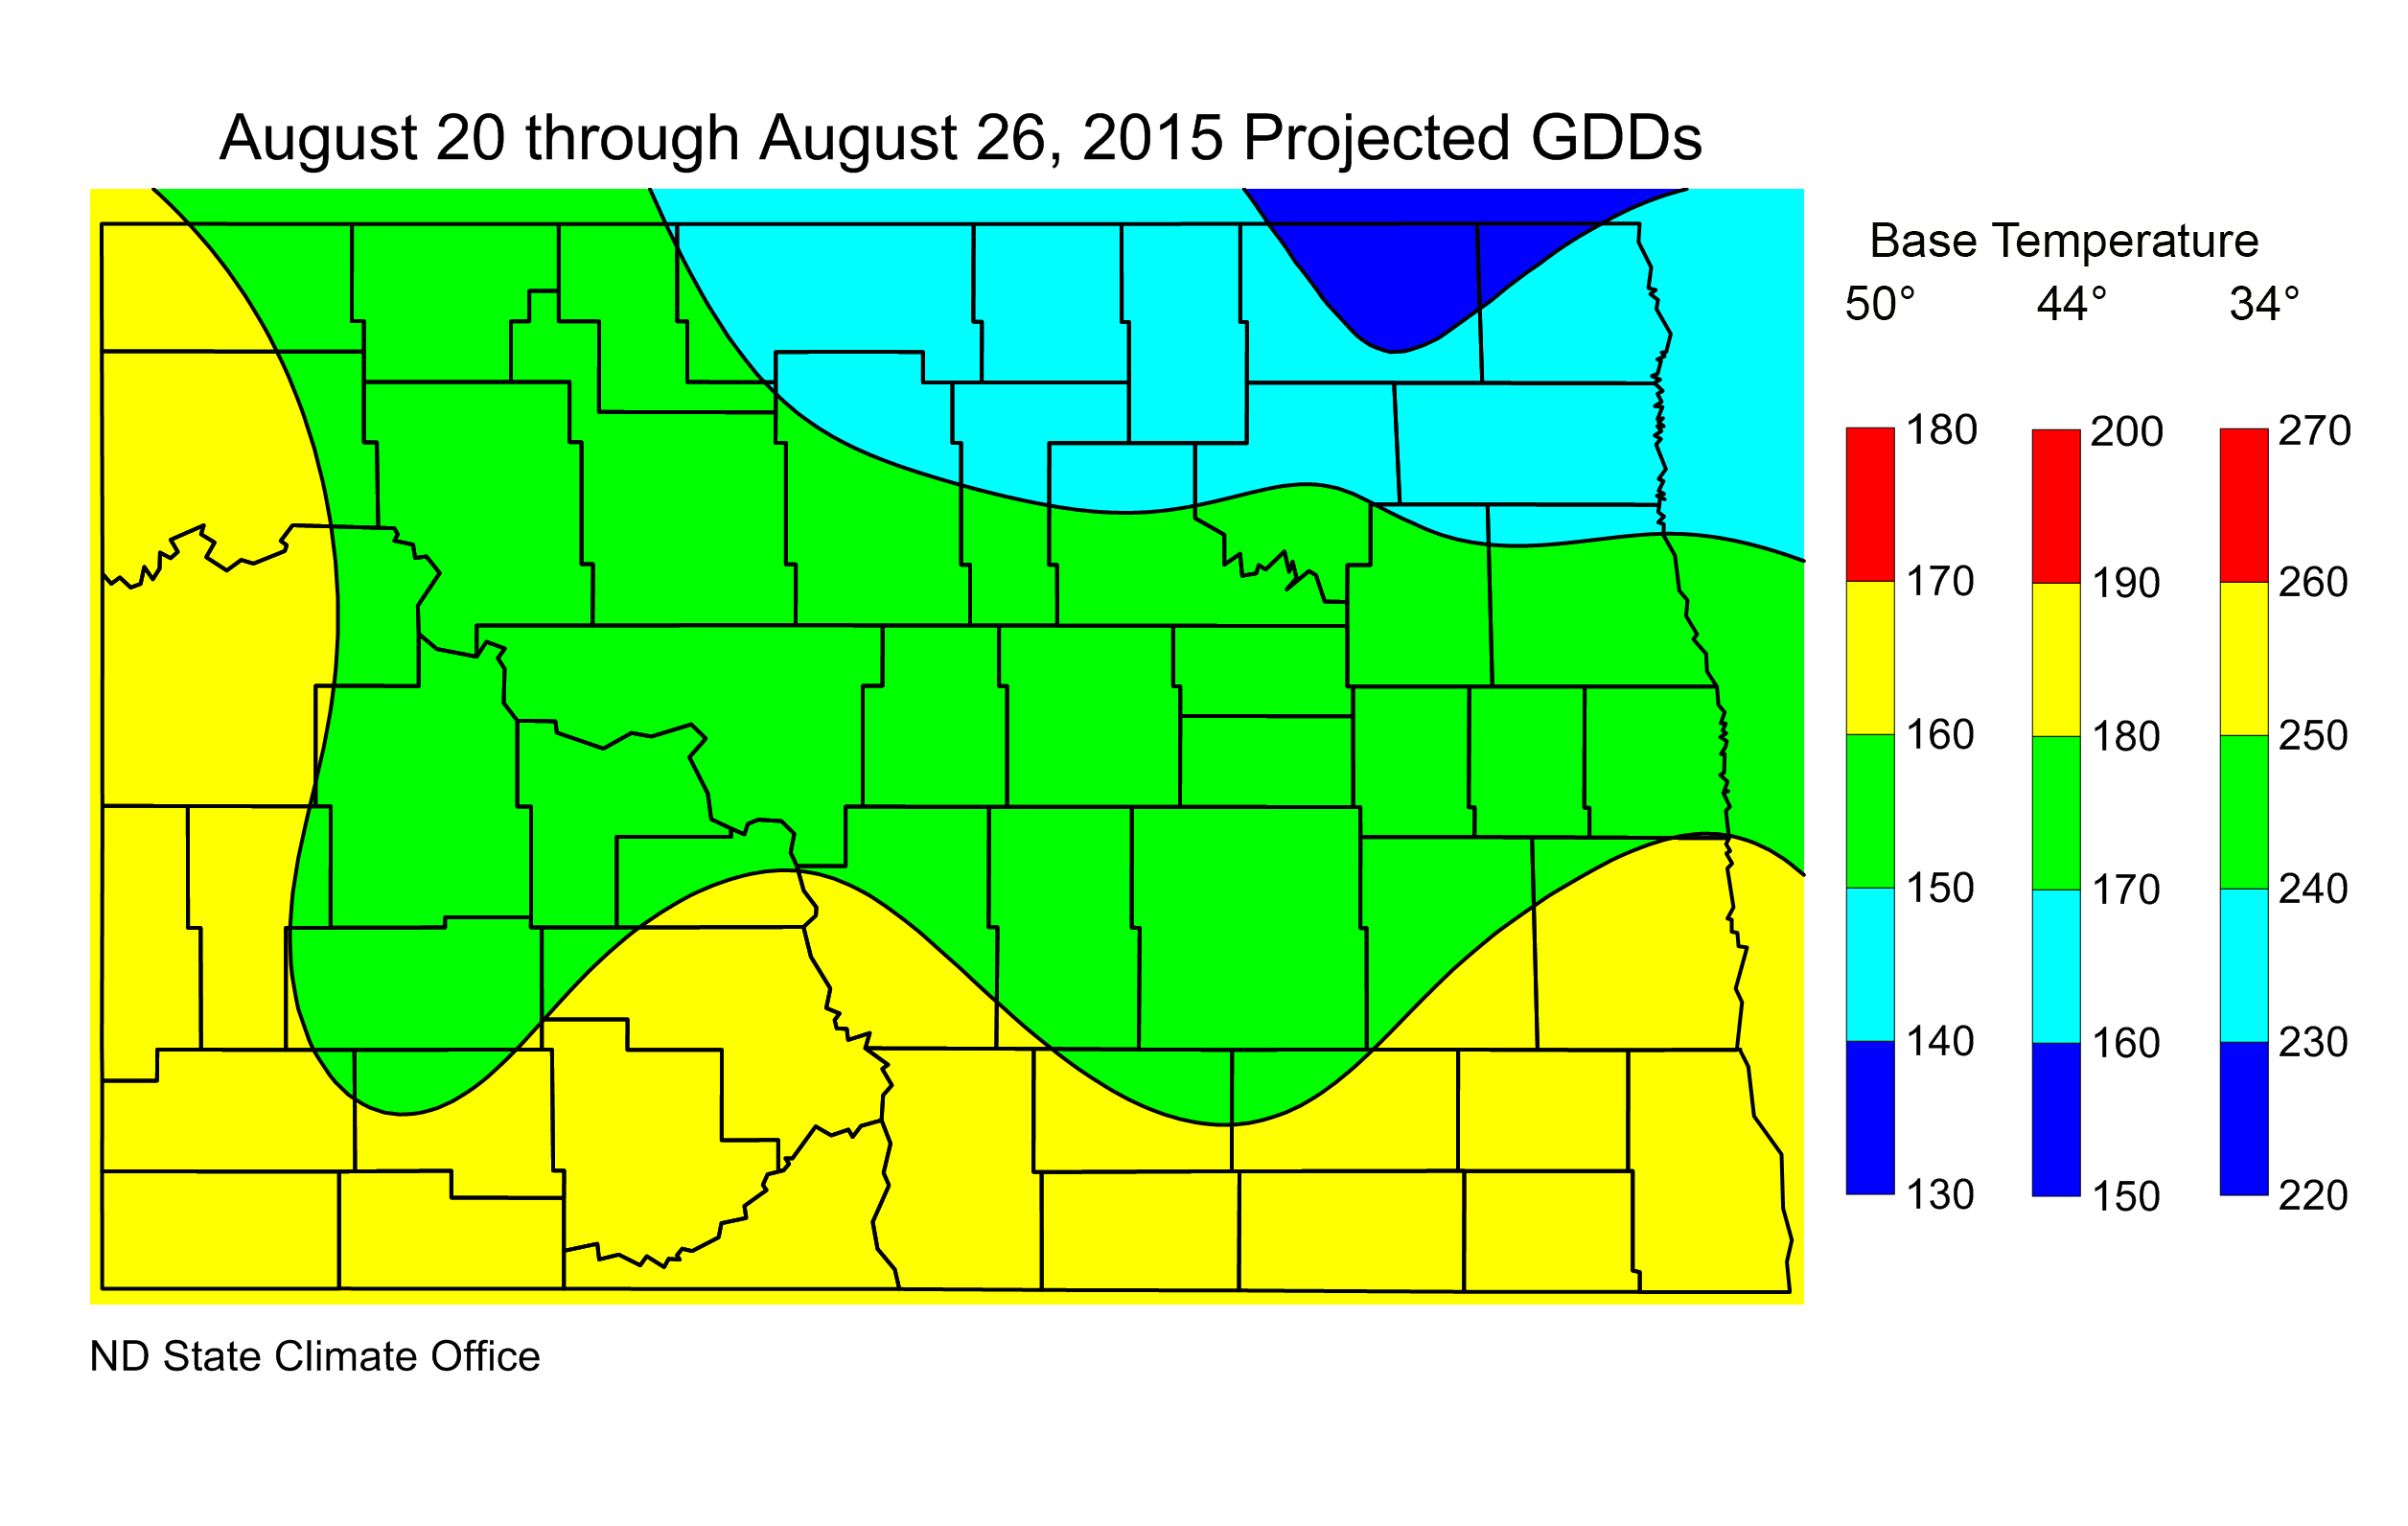 Figure 2. Projected Growing Degree Days from August 20 through August 26, 2015